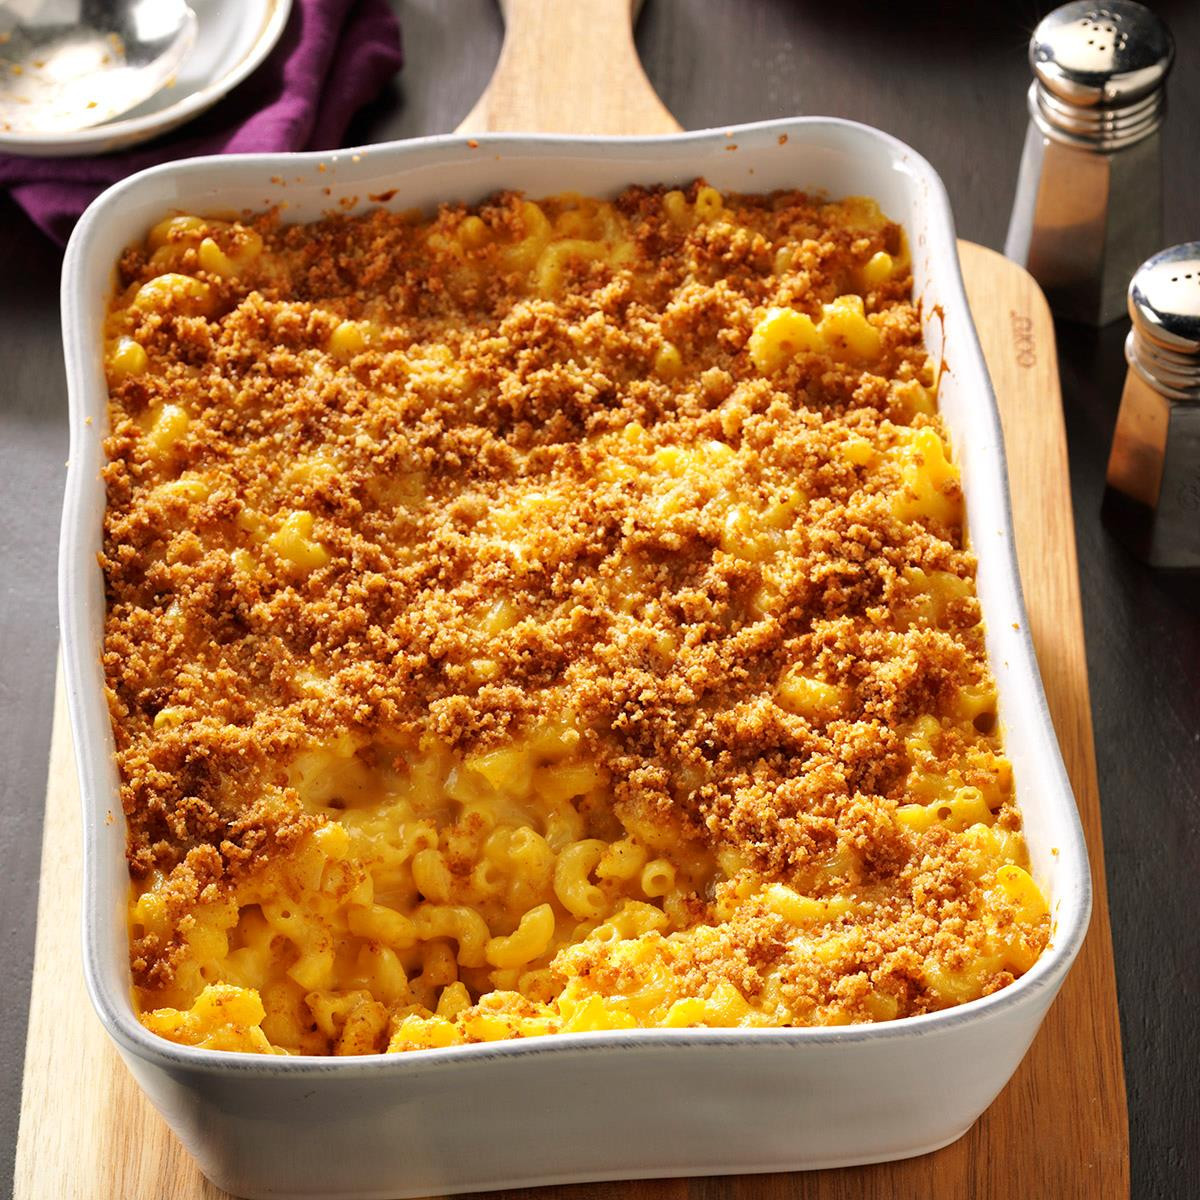 Macaroni And Cheese Homemade Baked
 Baked Mac and Cheese Recipe